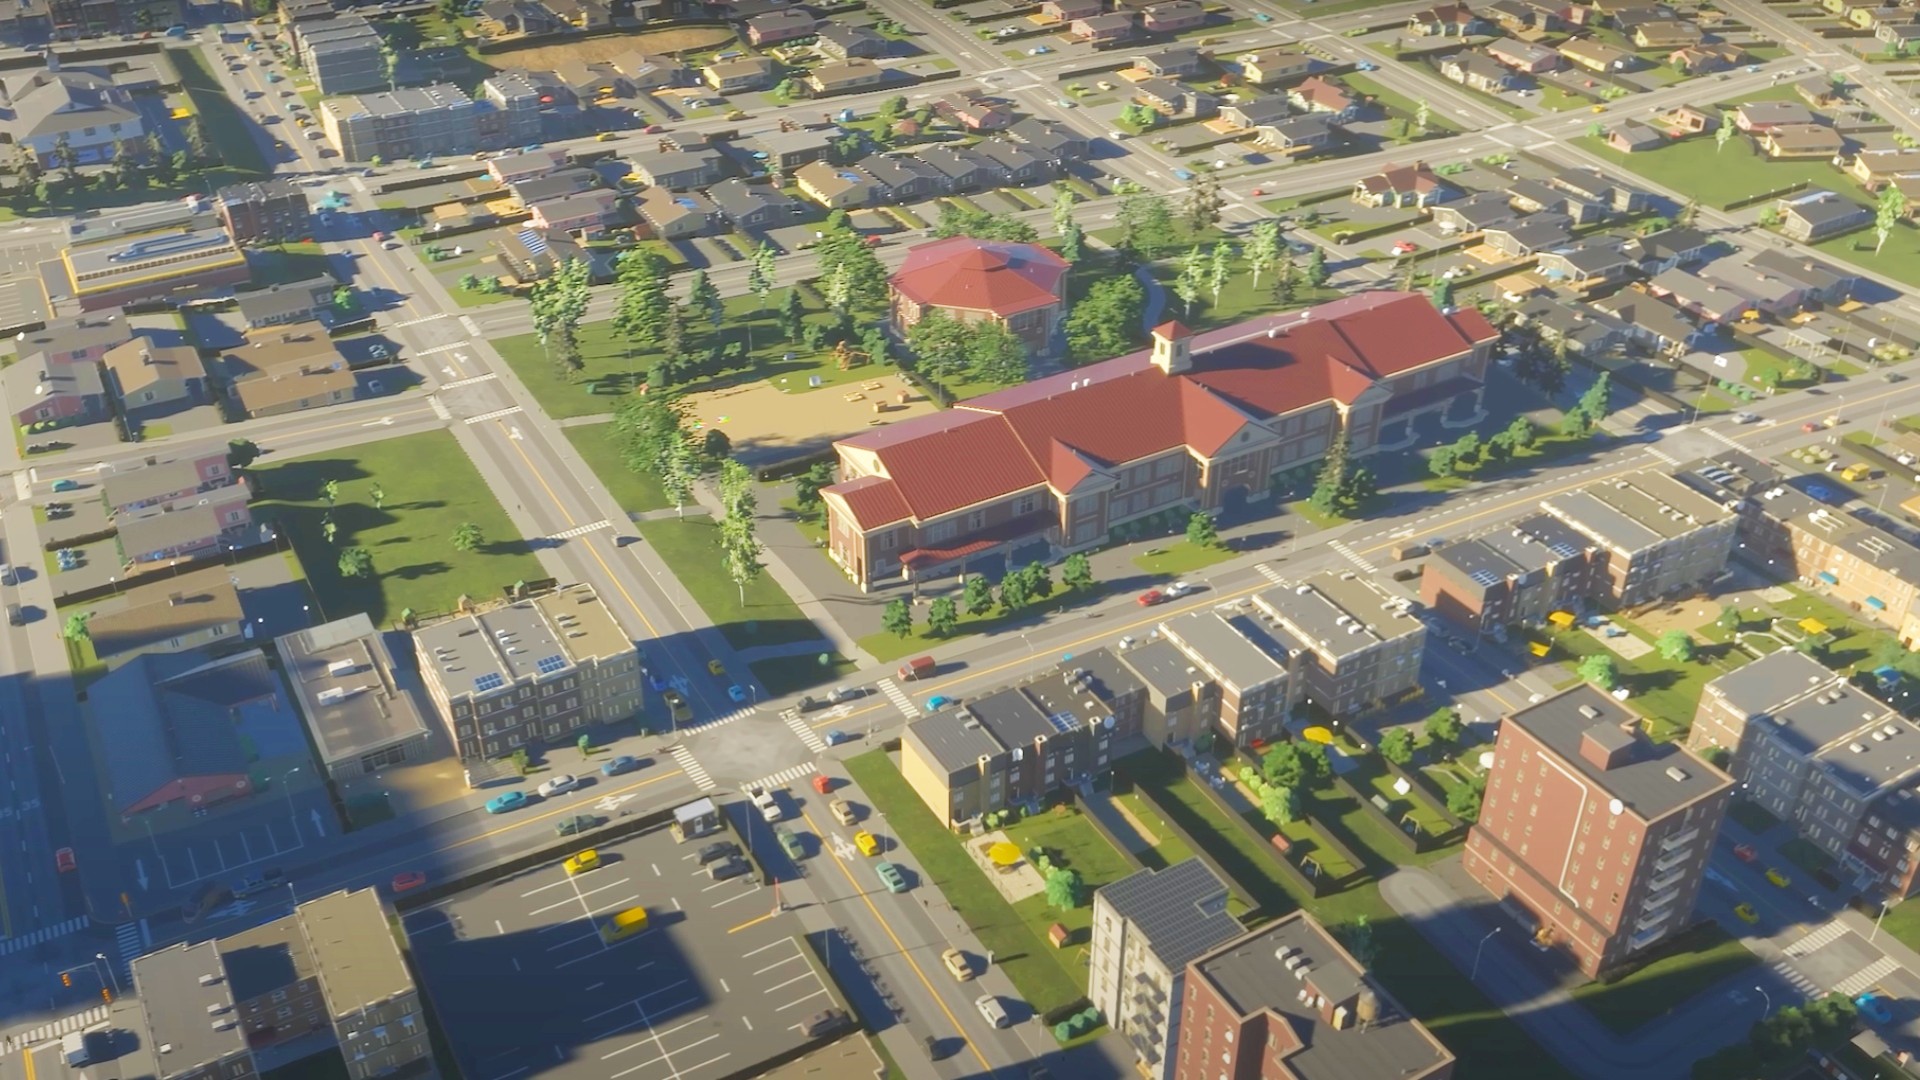 Cities Skylines 2 CEO apologizes for “poor choice of words”